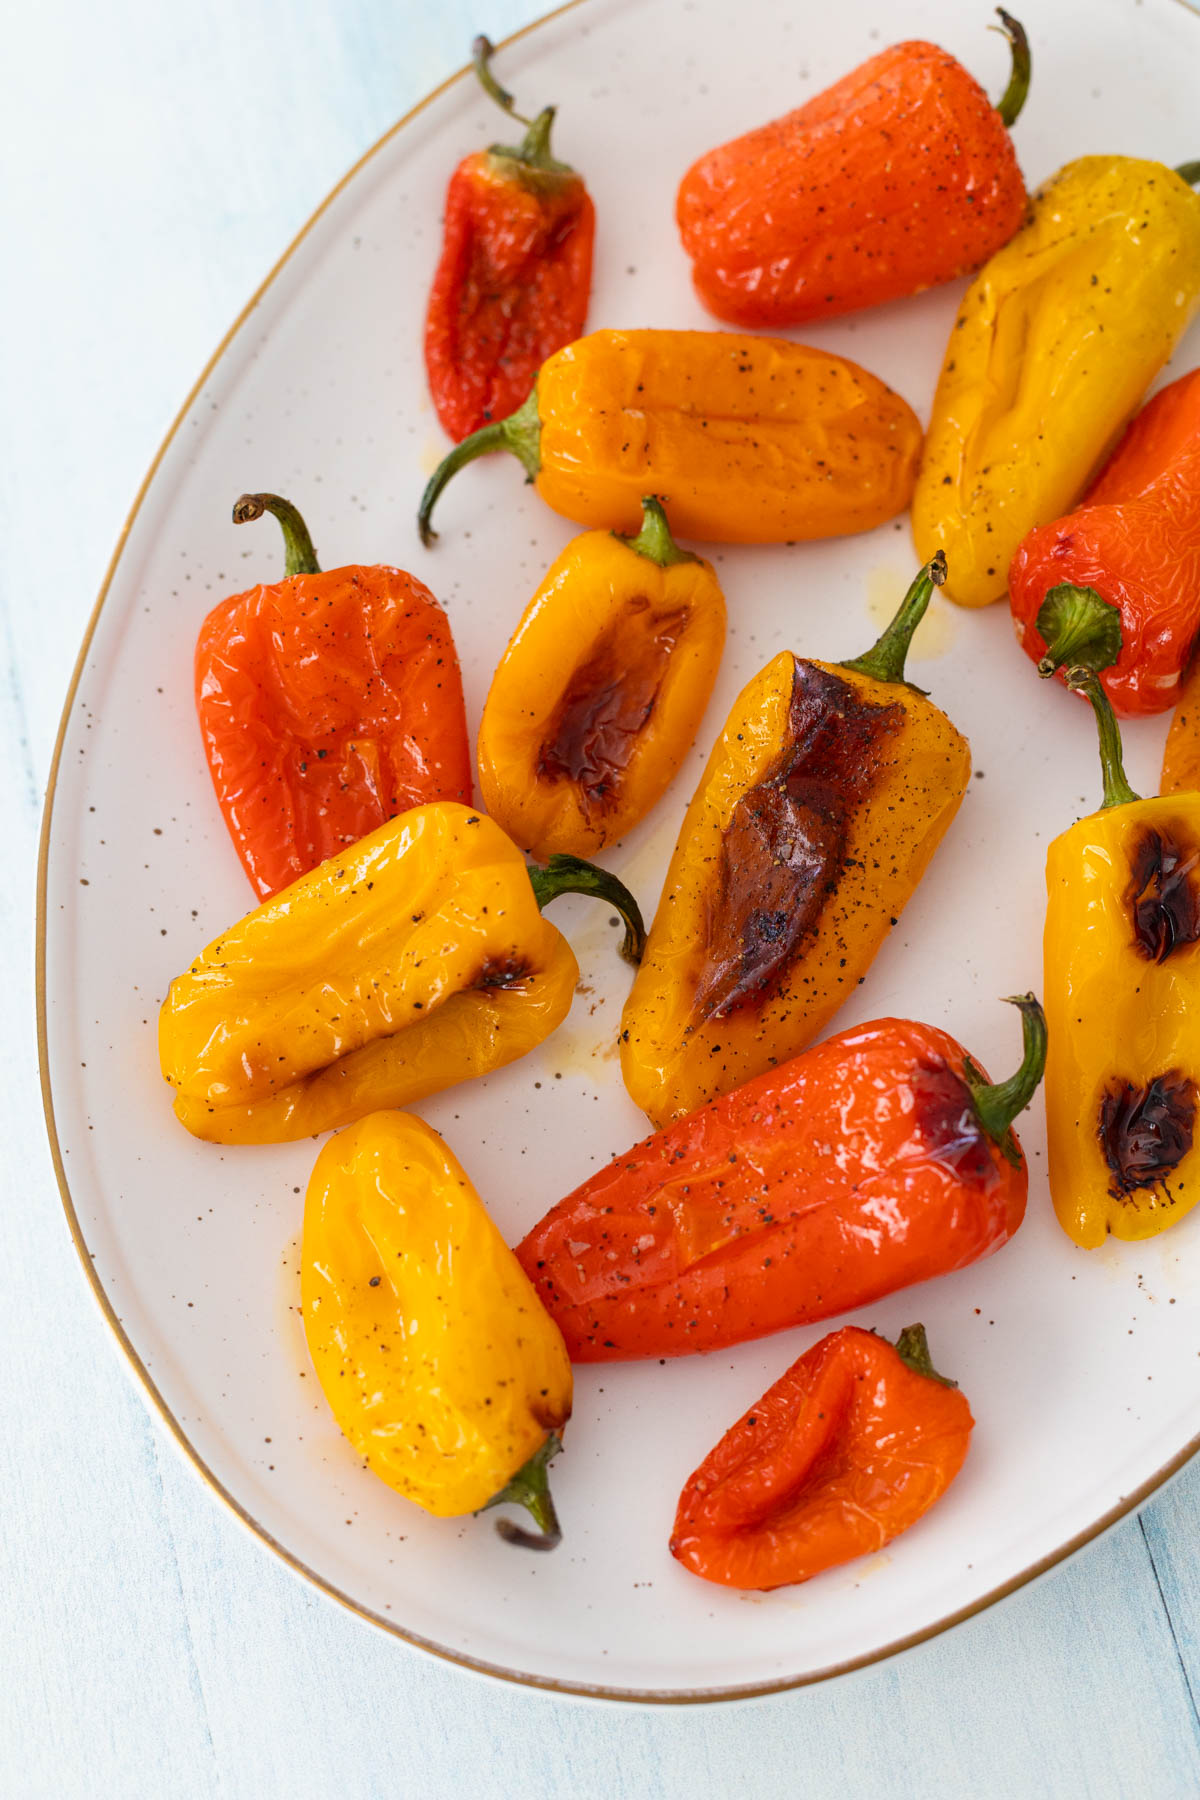 The mini peppers are perfectly charred and served at the table.